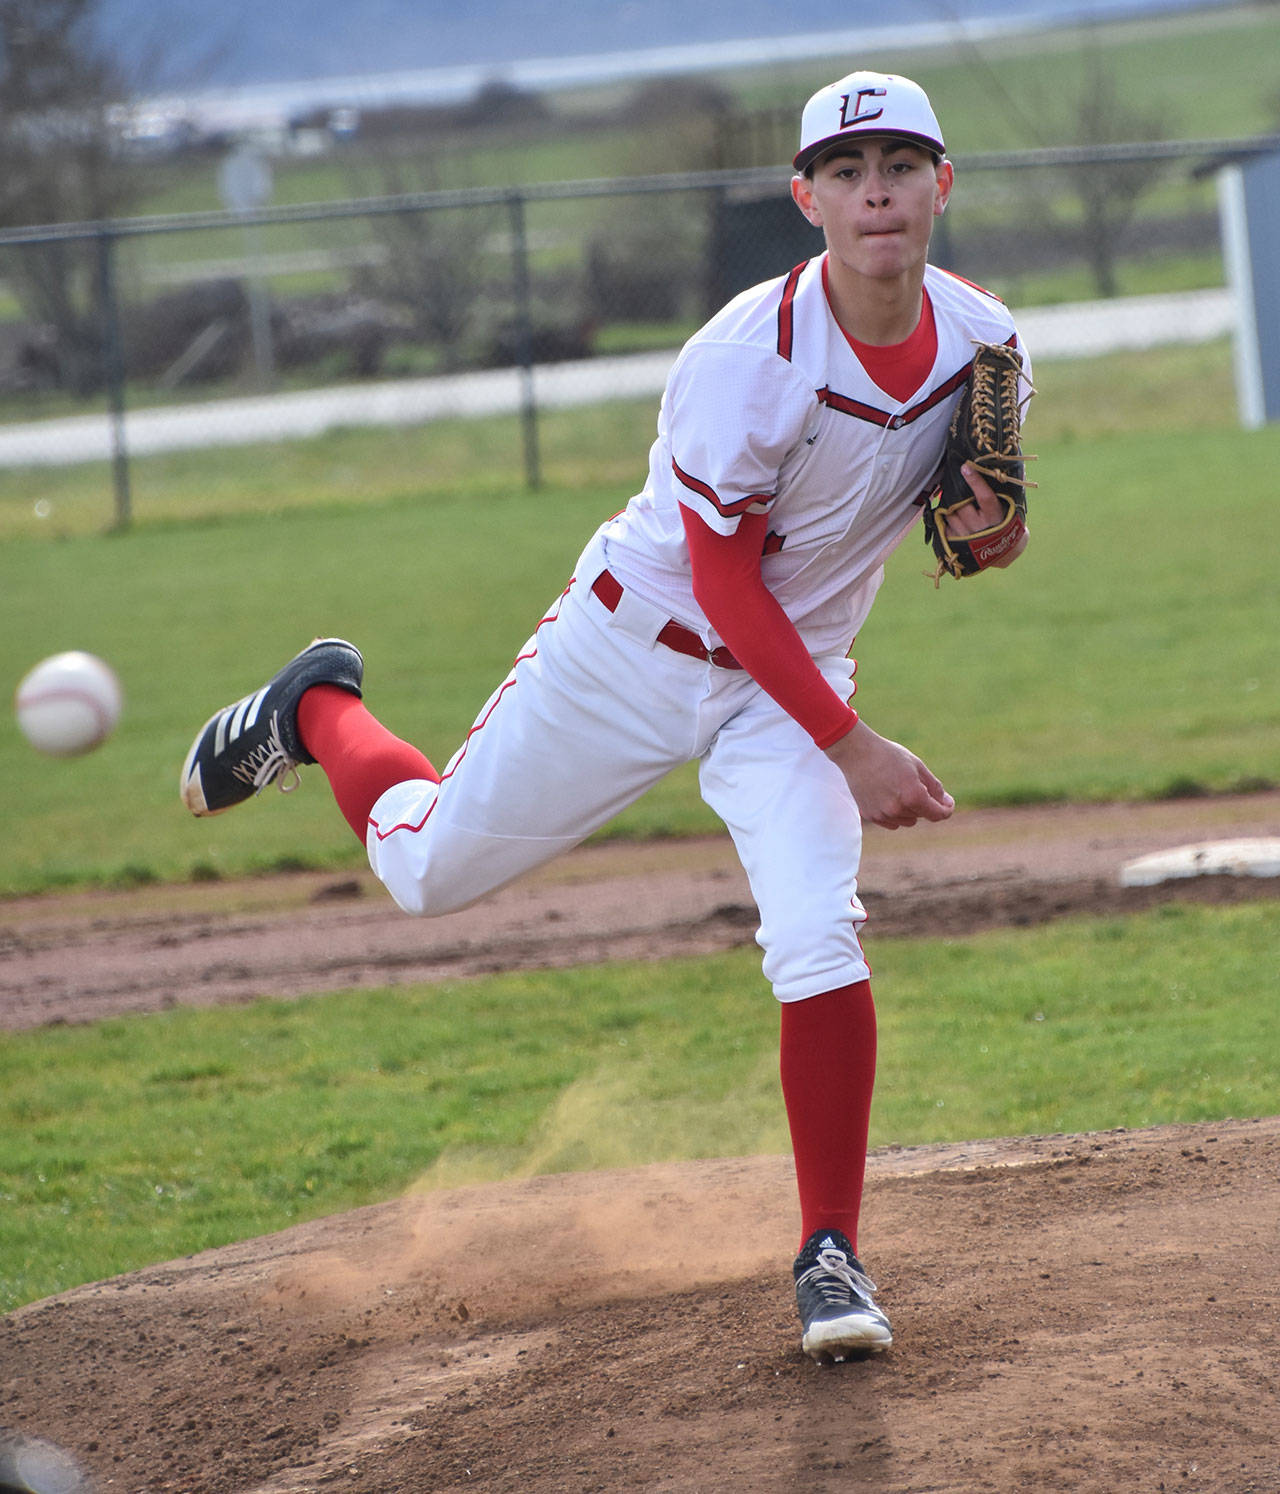 Hunter Smith, shown here pitching in a game earlier this season, pitched a no-hitter in his final game on the Coupeville High School diamond Wednesday. (Photo by Karen Carlson)